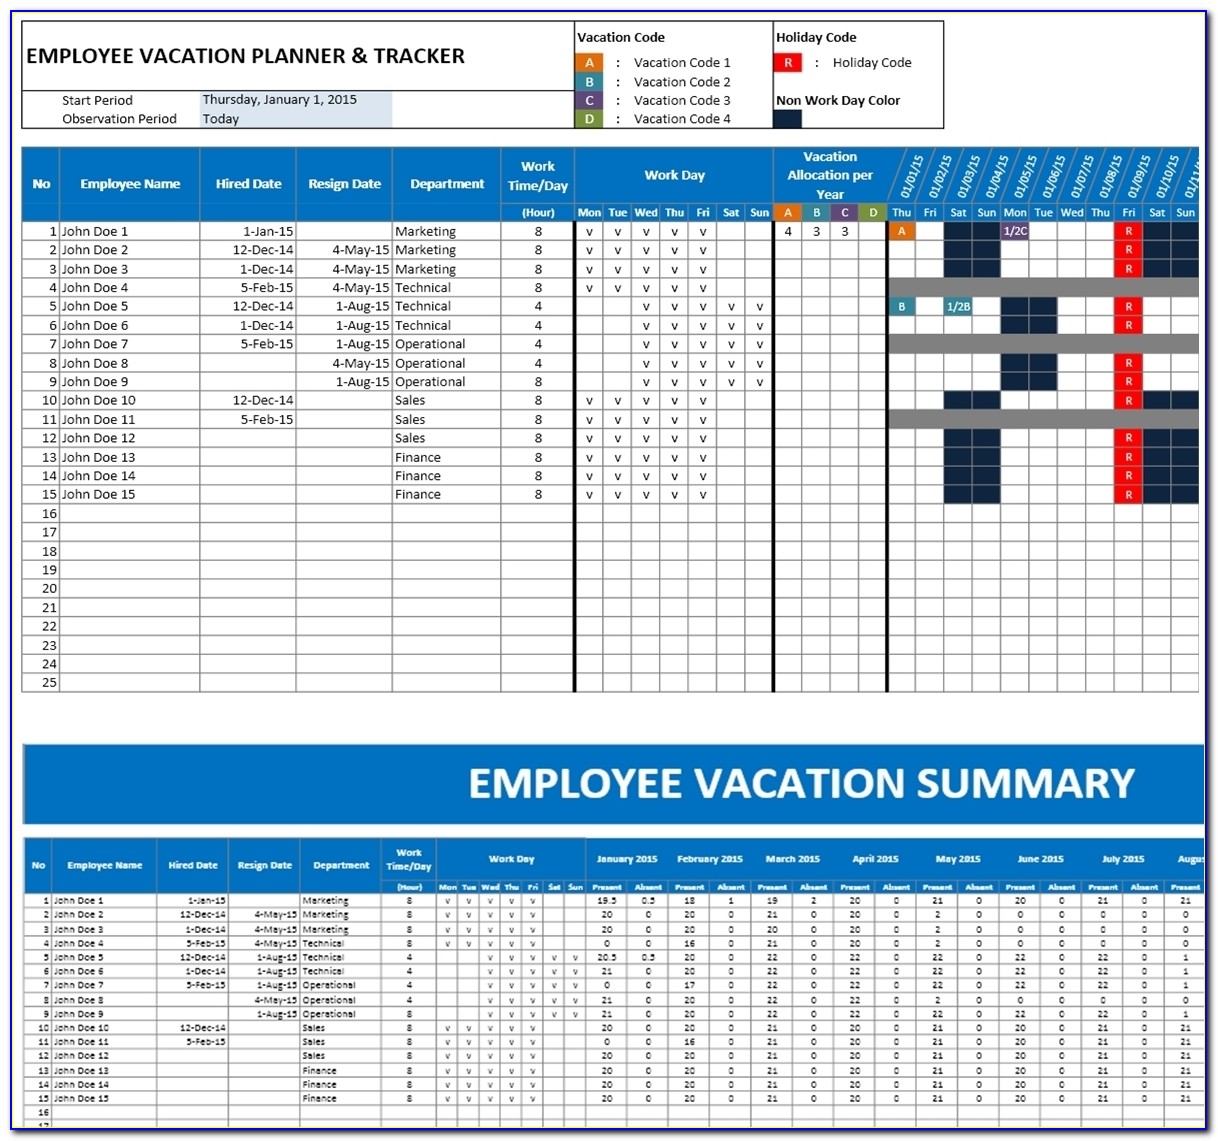 Employee Vacation Tracker Template Excel 2019